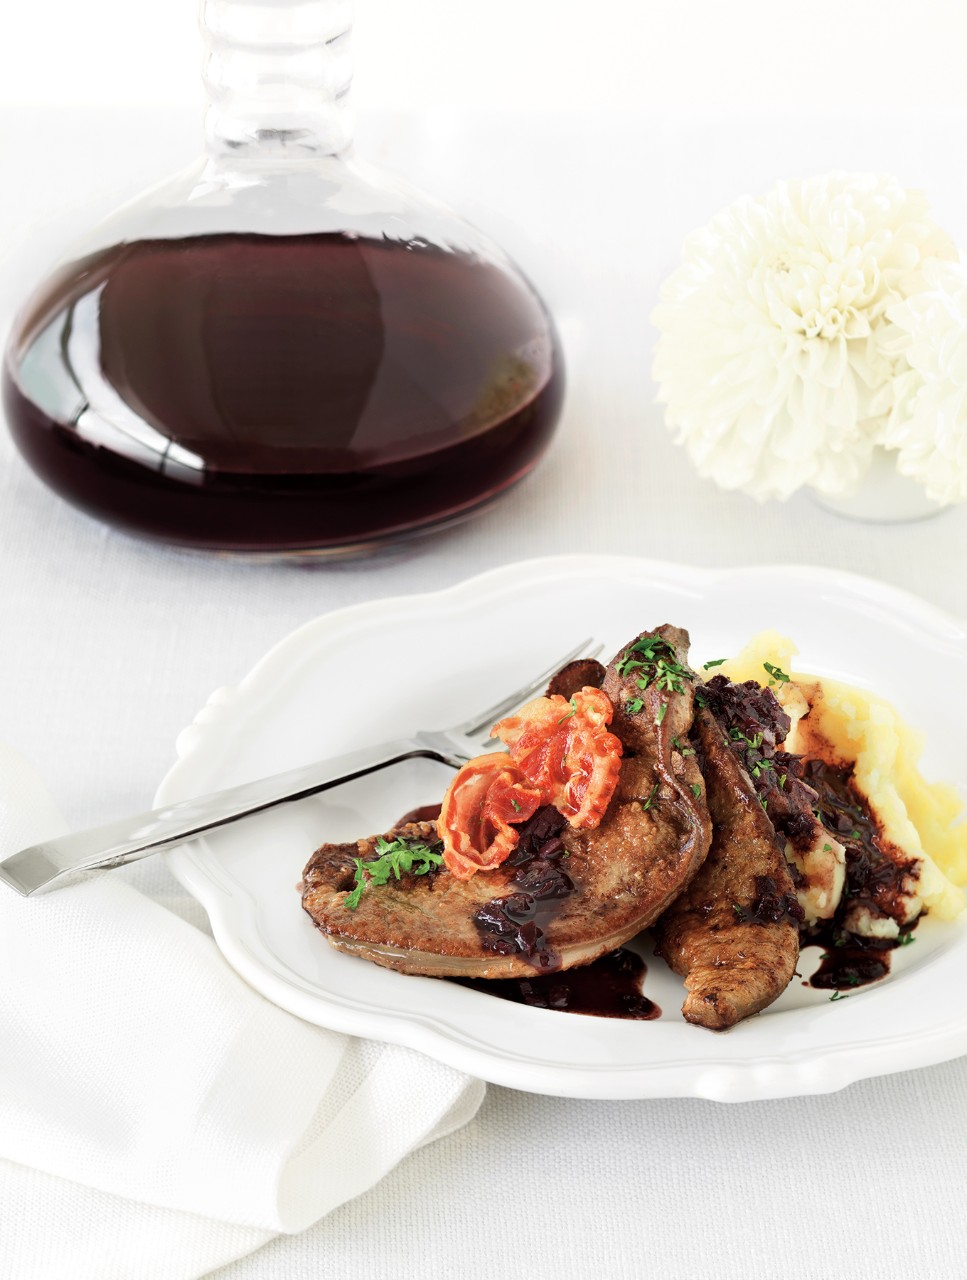 Seared Calf’s Liver with Pancetta and Red Wine Sauce